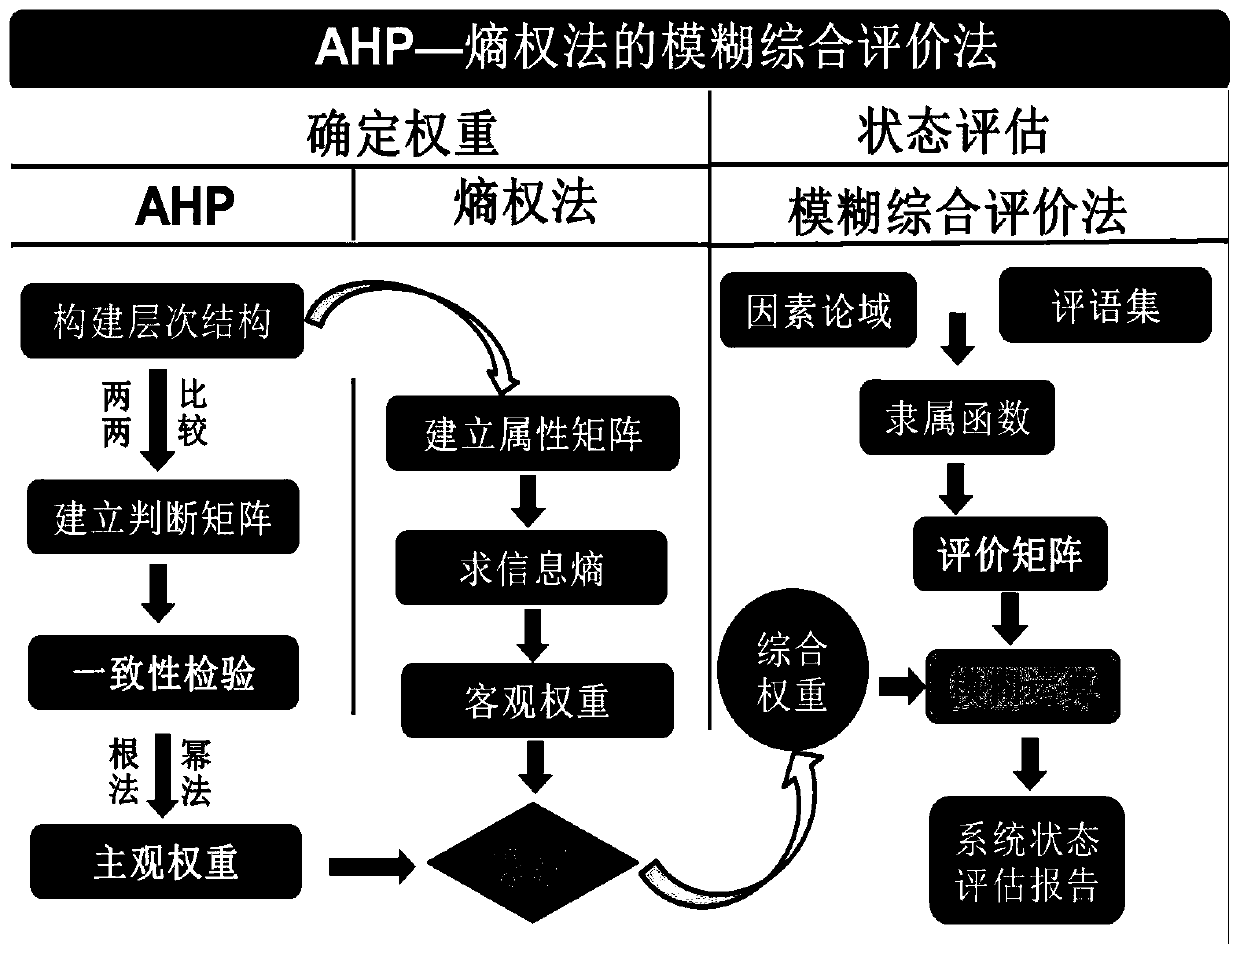 Satellite health state multistage fuzzy evaluation method based on AHP-entropy weight method